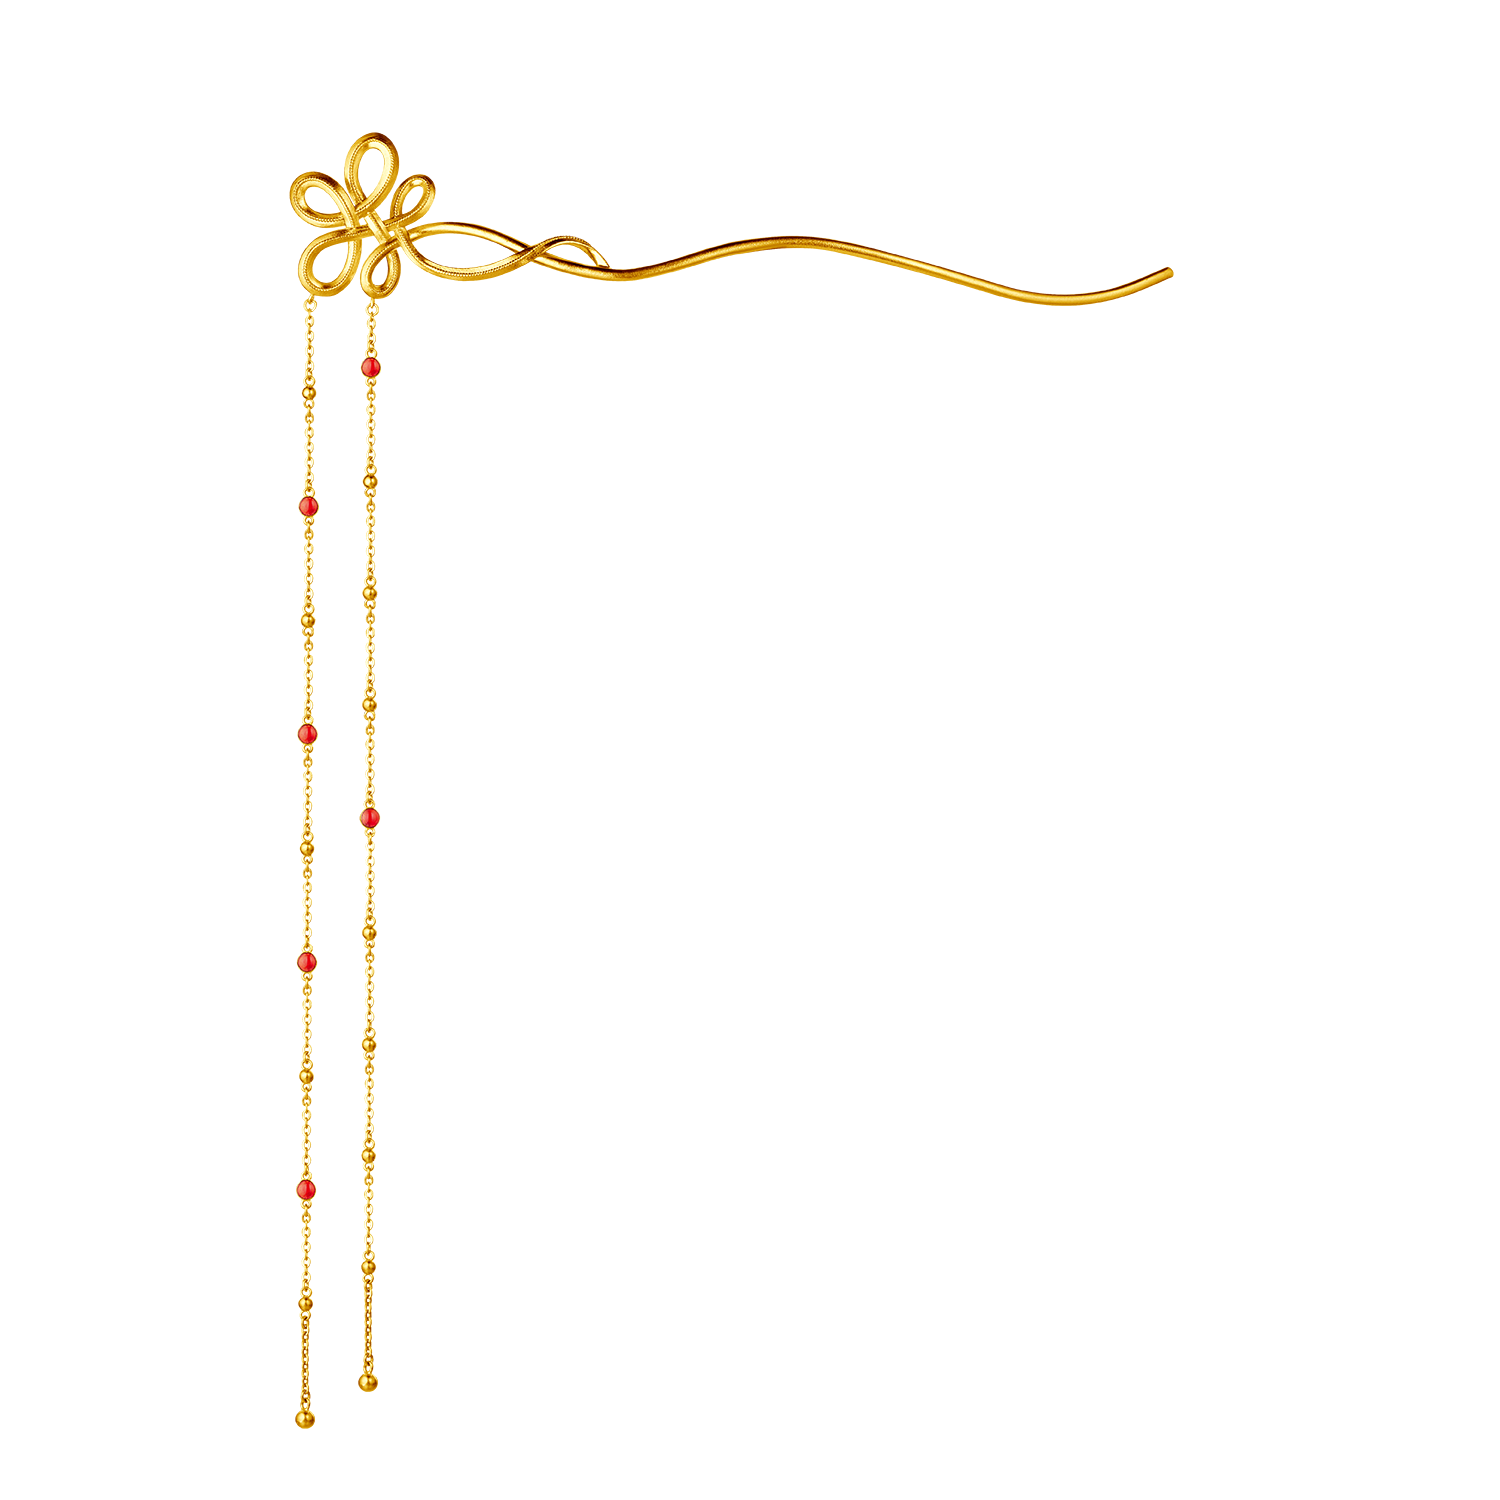 Heirloom Fortune Collection "Tie the Knot" Gold Hairpin